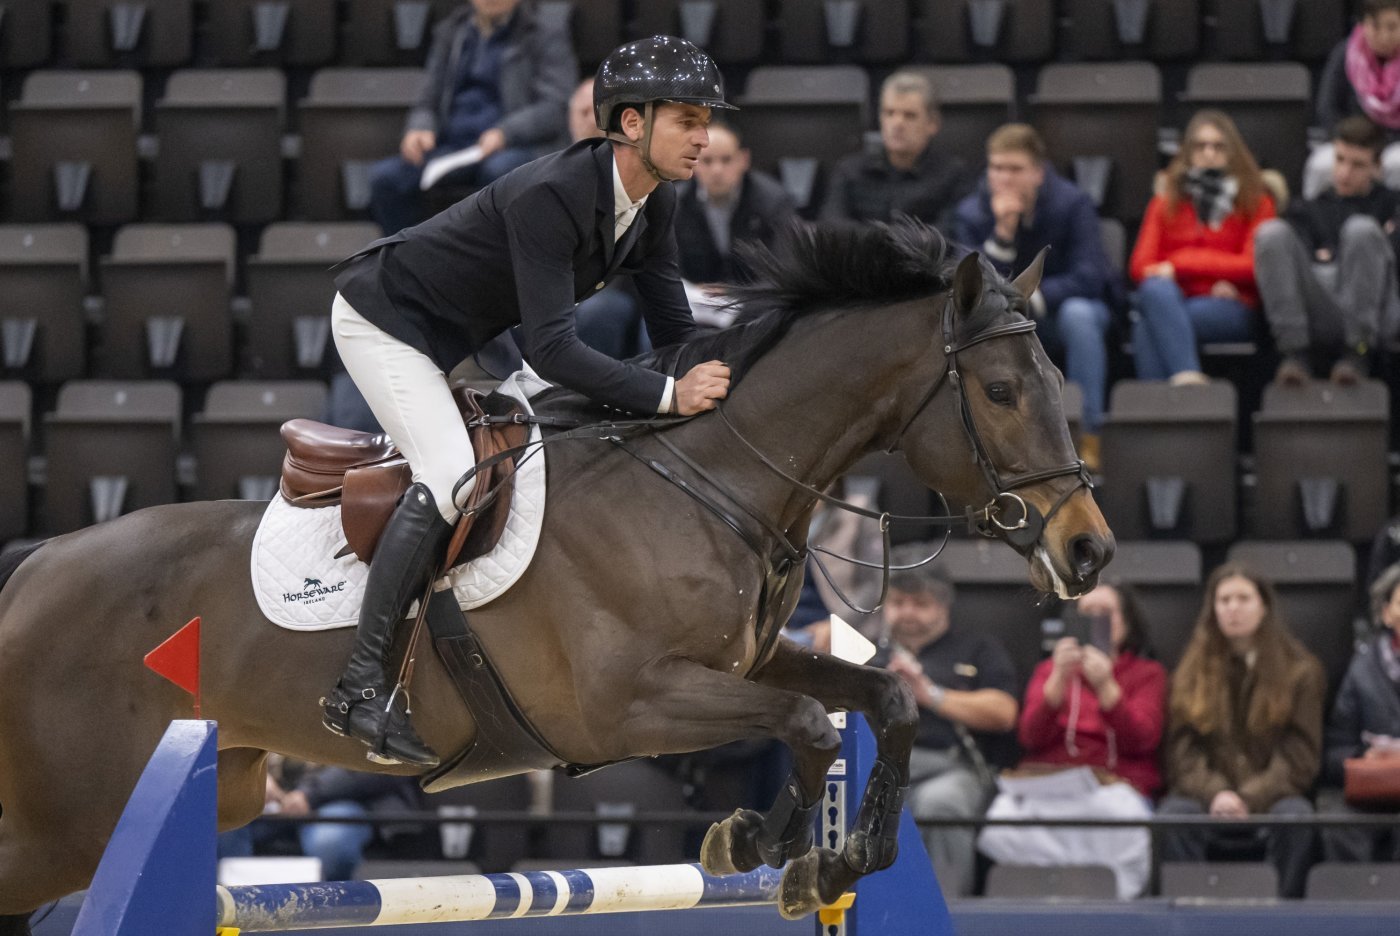 Switzerland's Steve Guerdat rides Lancelotta during the jumping competition prize of Thermoplan at the CHI Classics Basel international horse show at the St. Jakobshalle in Basel, Switzerland, on Thursday, January 11, 2024. (KEYSTONE/Georgios Kefalas)